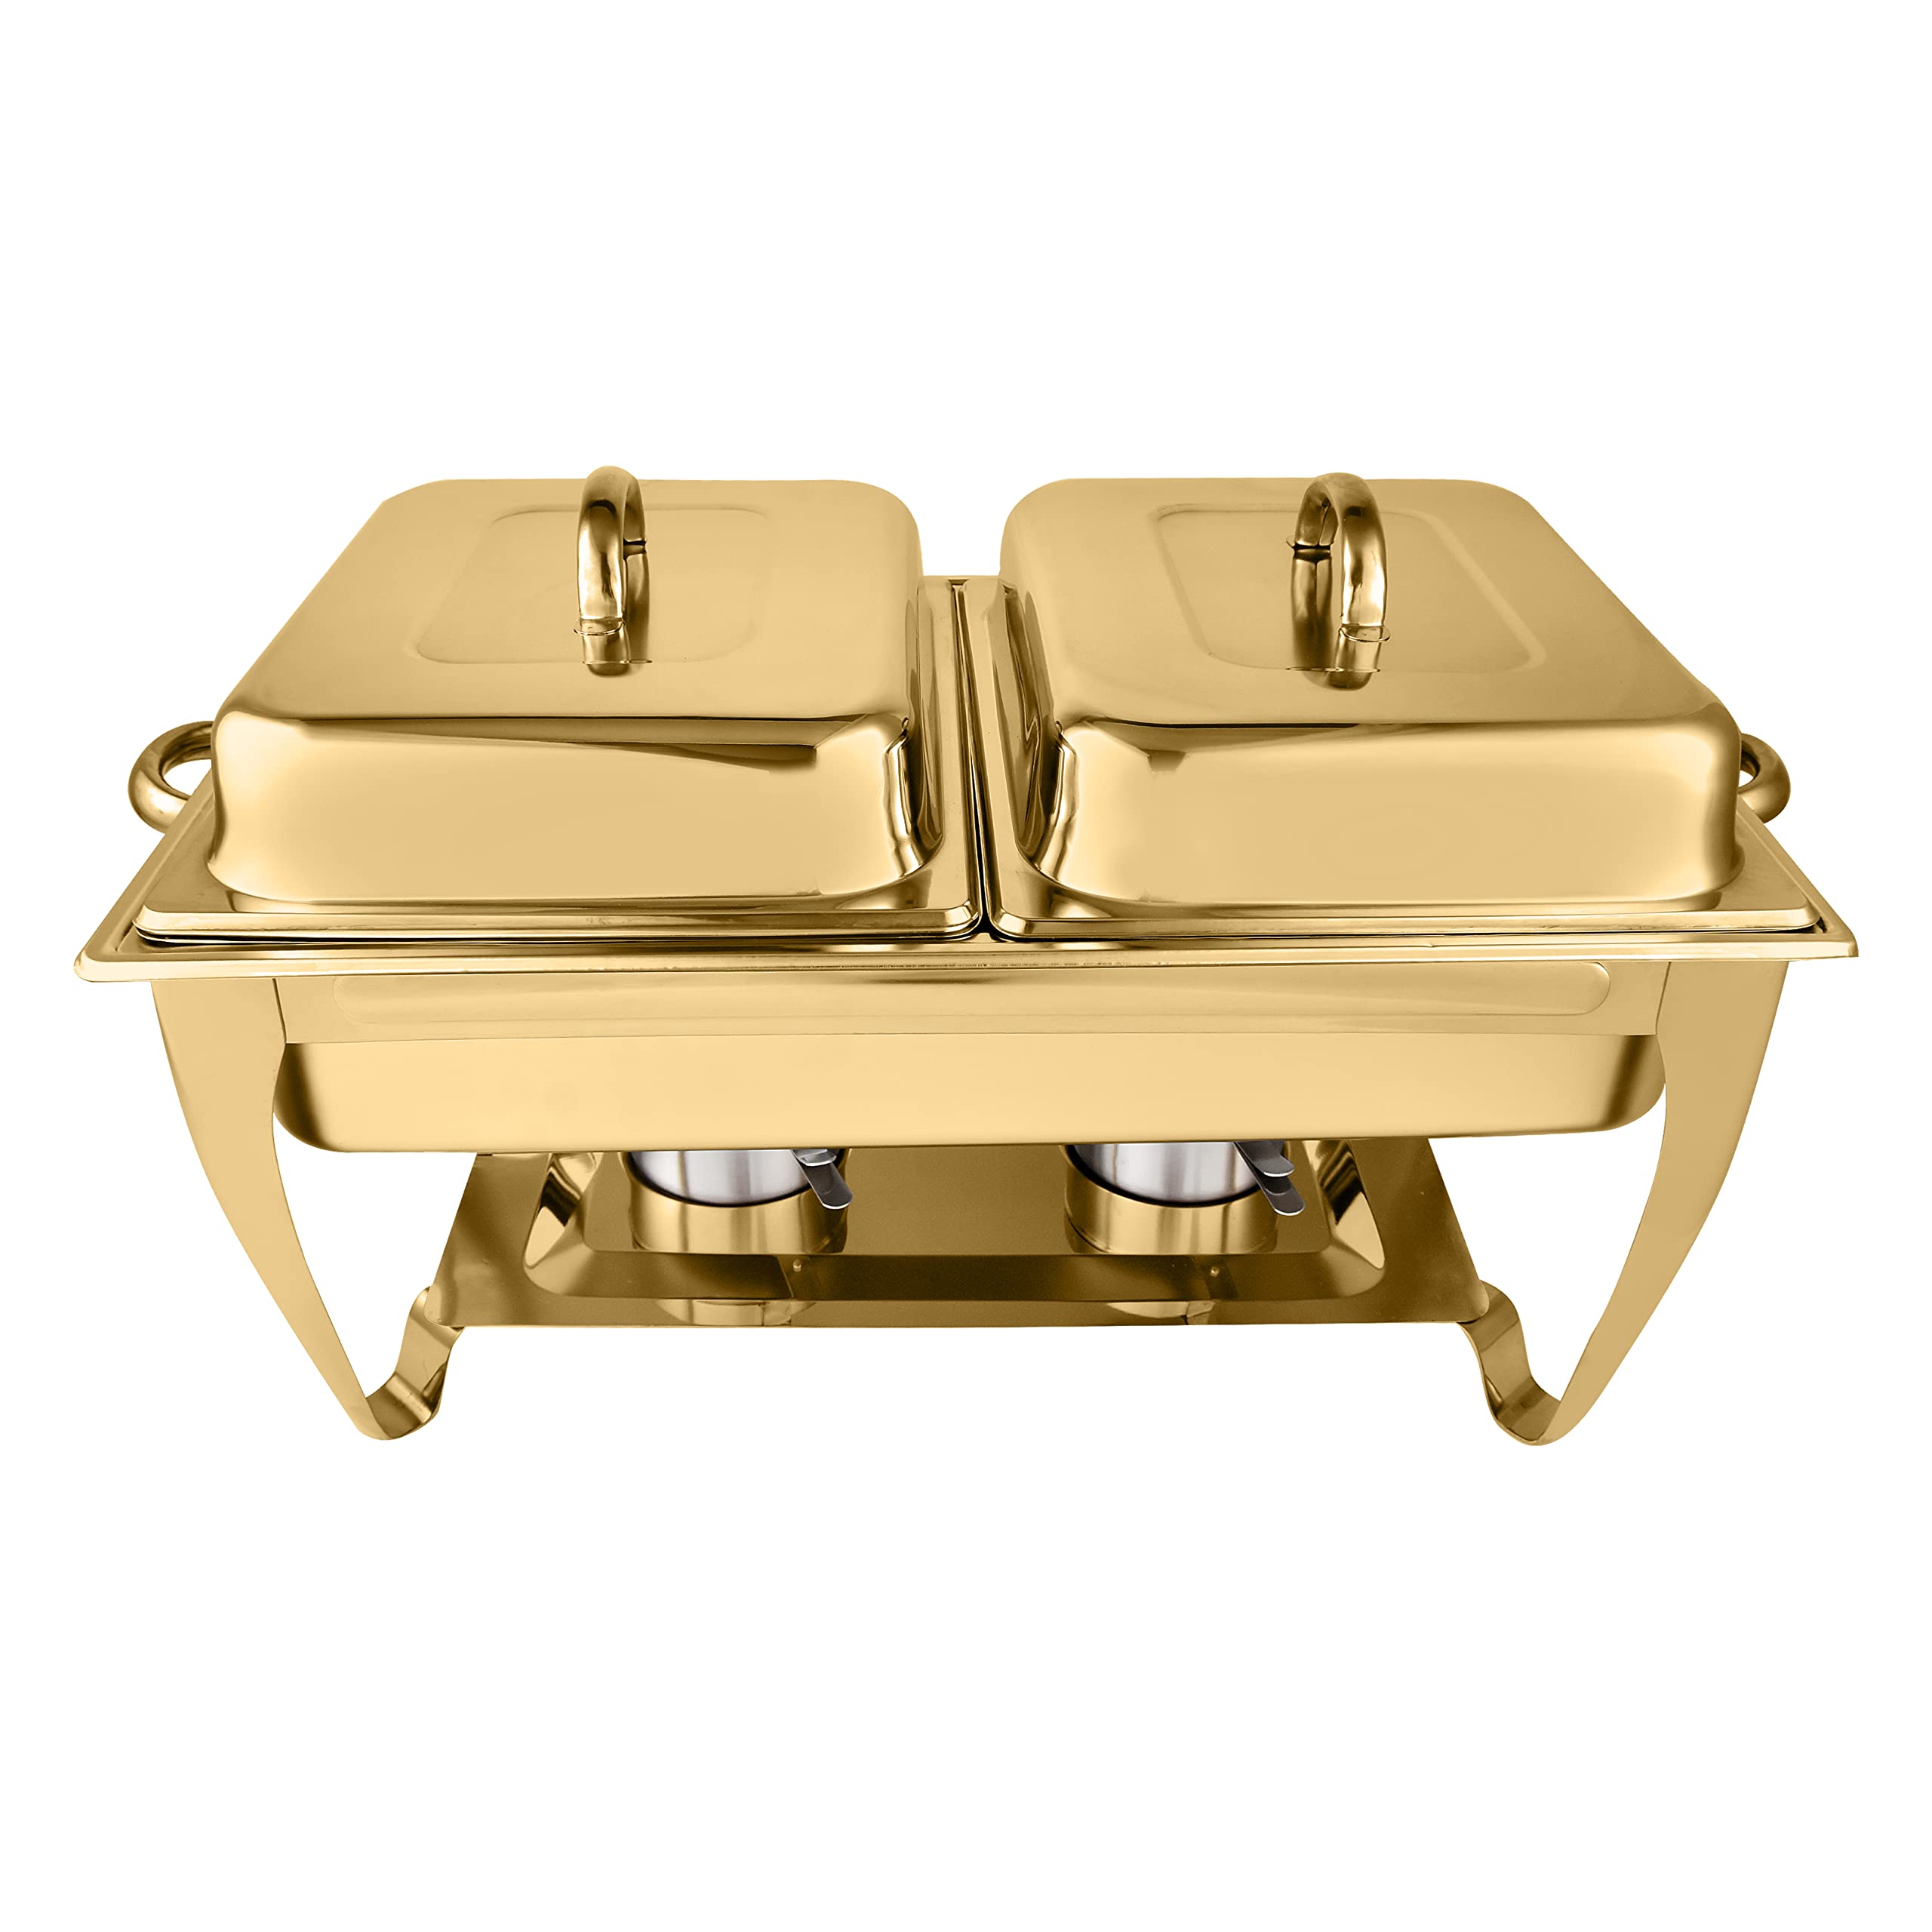 HONHPD Golden Chafing Dish Buffet Set, 9 QT Stainless Steel Food Warmer - 9 Liters Buffet Servers with Fuel Holder & Water Pan - Chafer Set for Banquet Parties Even Catering Wedding